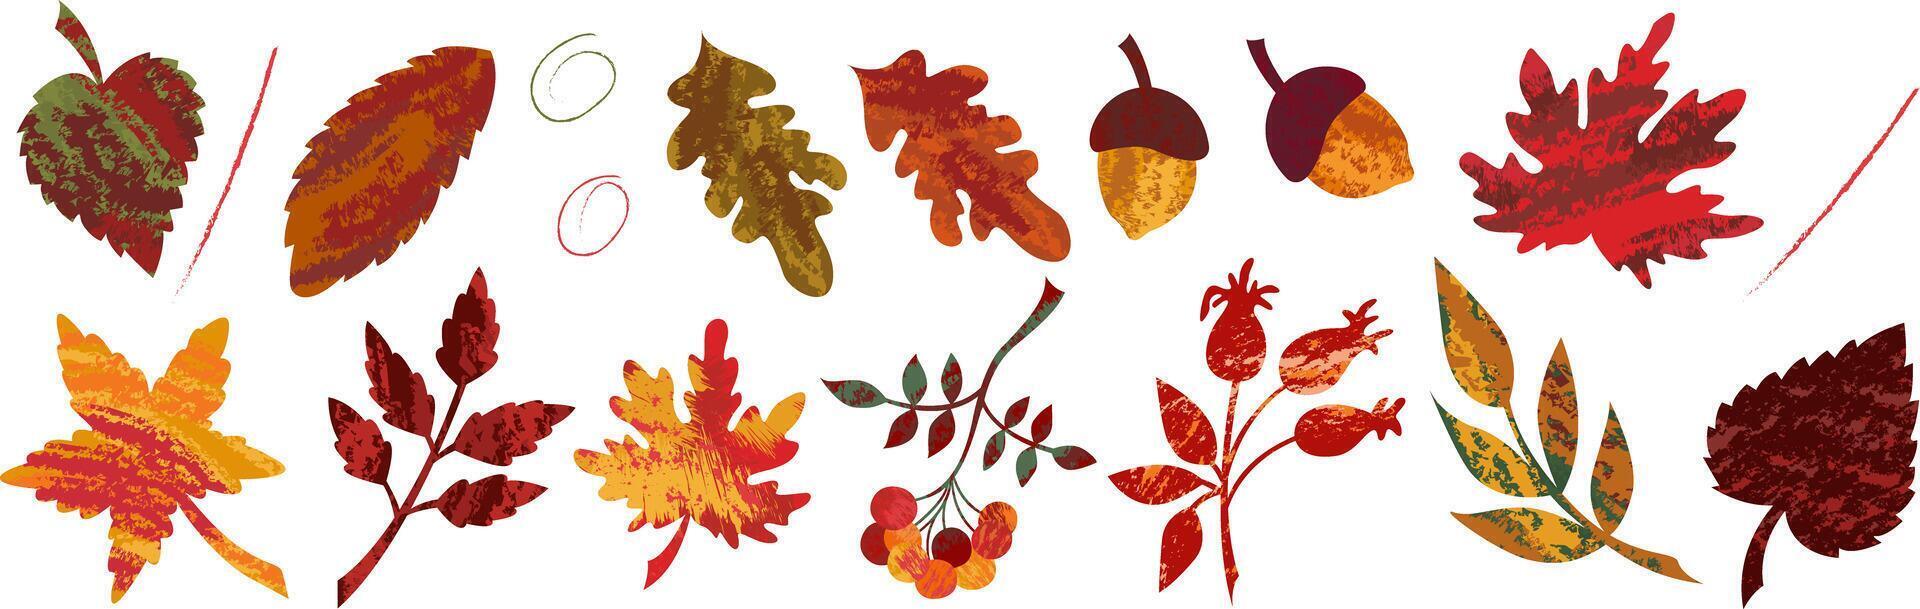 Autumn set of isolated elements of abstract texture leaves of maple, oak and rowan berries. Texture hand-drawn seasonal illustrations for autumn holidays design. vector